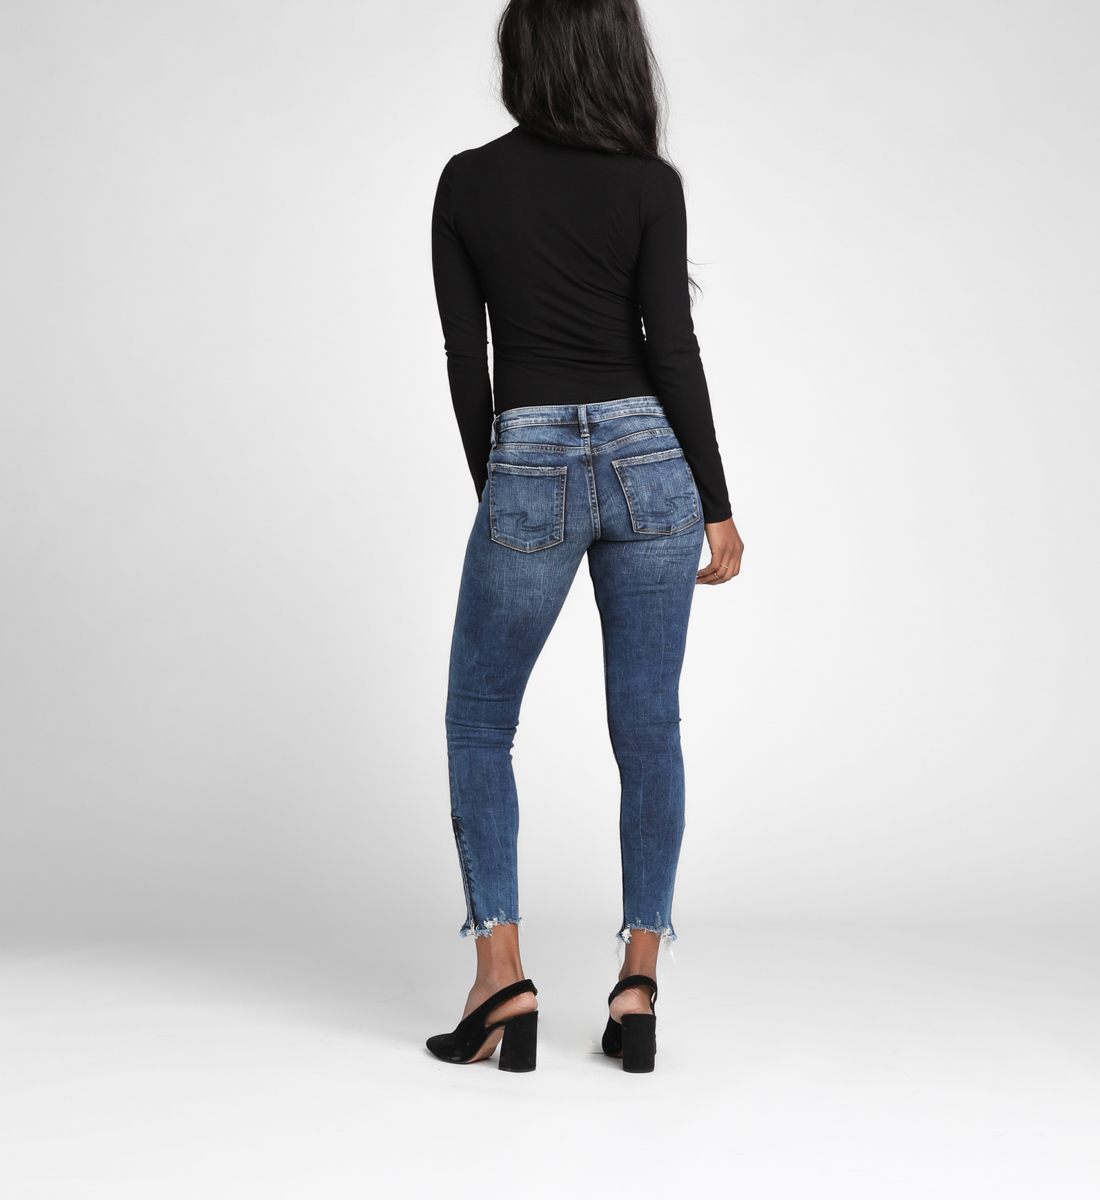 silver jeans tuesday low rise